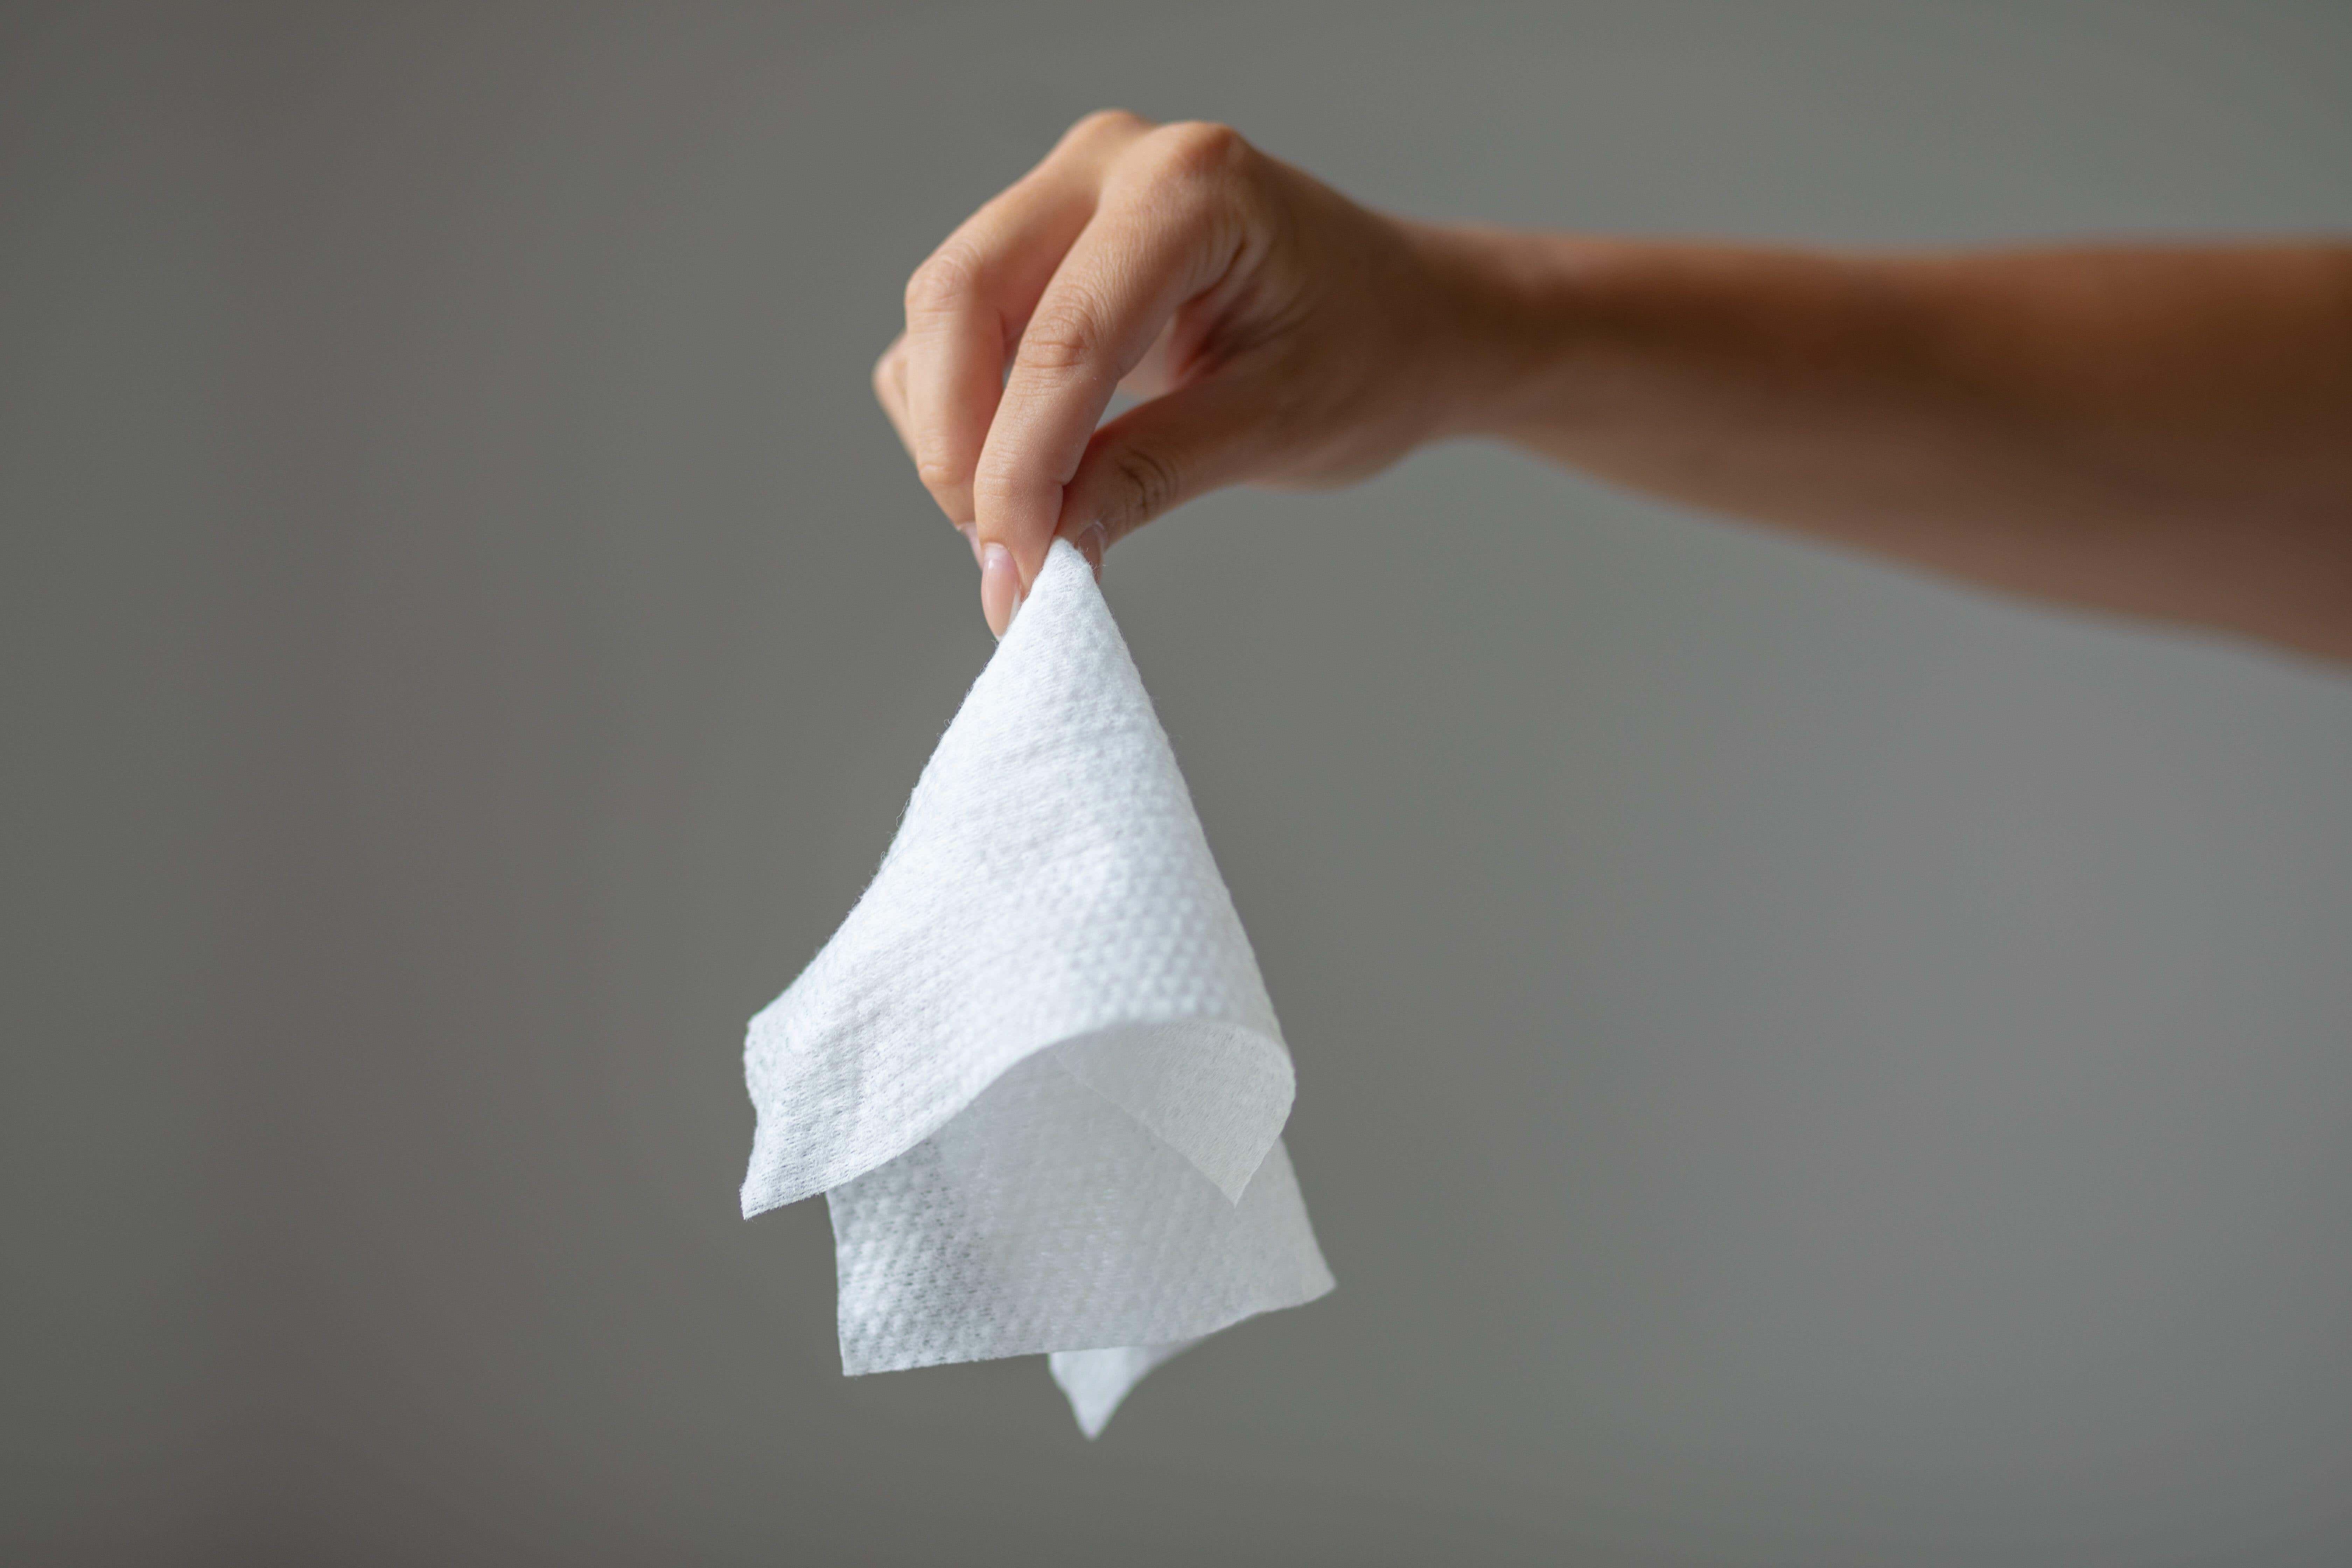 The water industry says wet wipes cause 93 per cent of sewage blockages